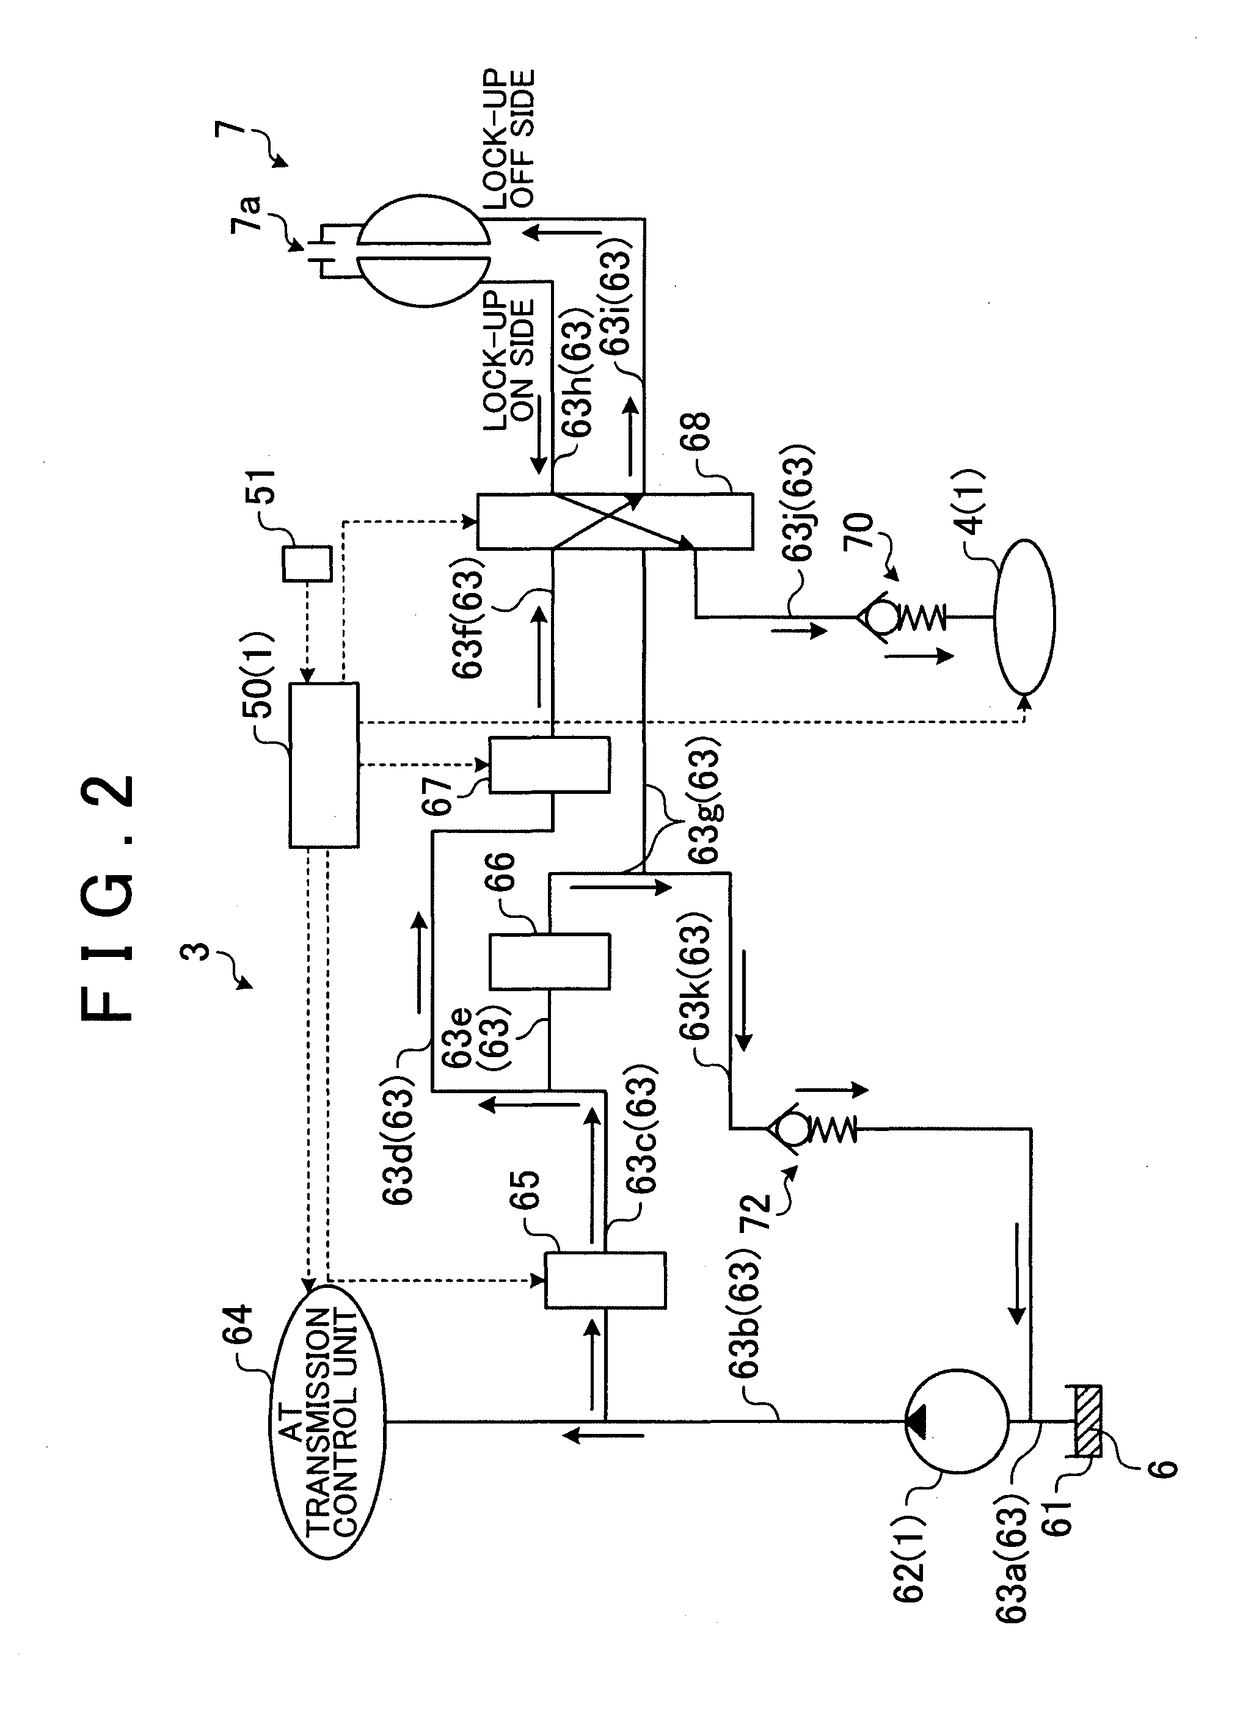 Lubrication control device for transmission